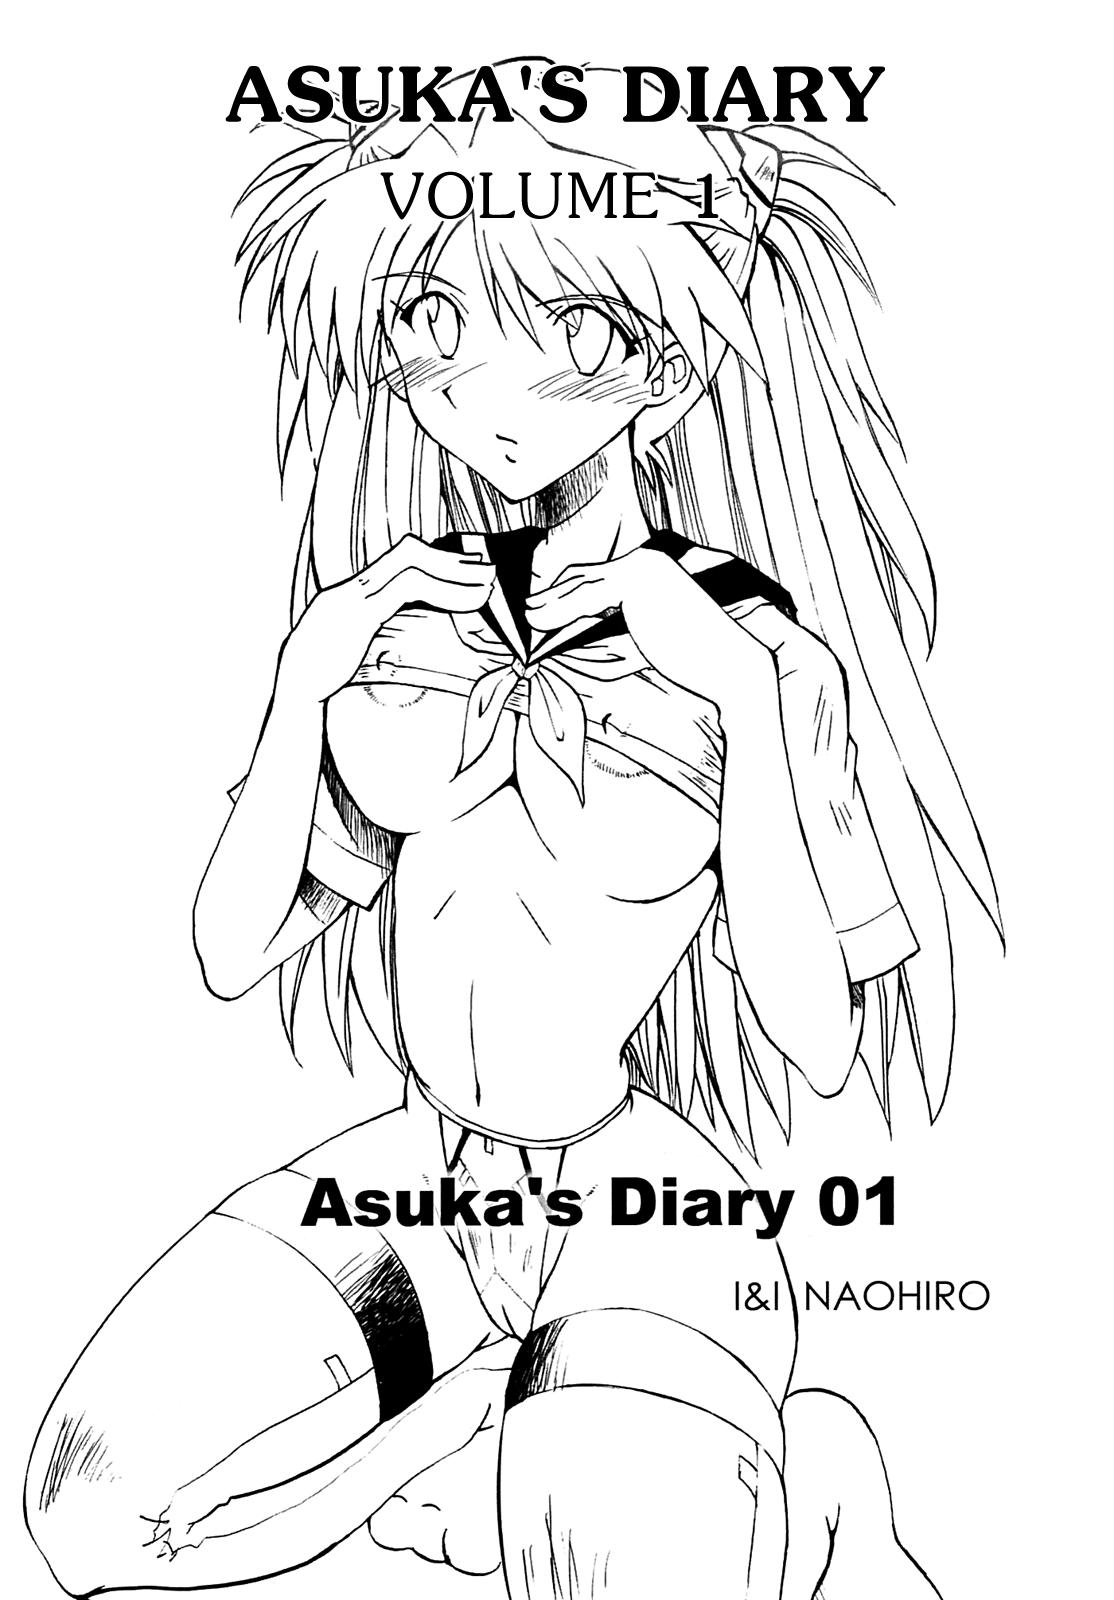 Classic Asuka's Diary 01 - Neon genesis evangelion Adult Toys - Page 3